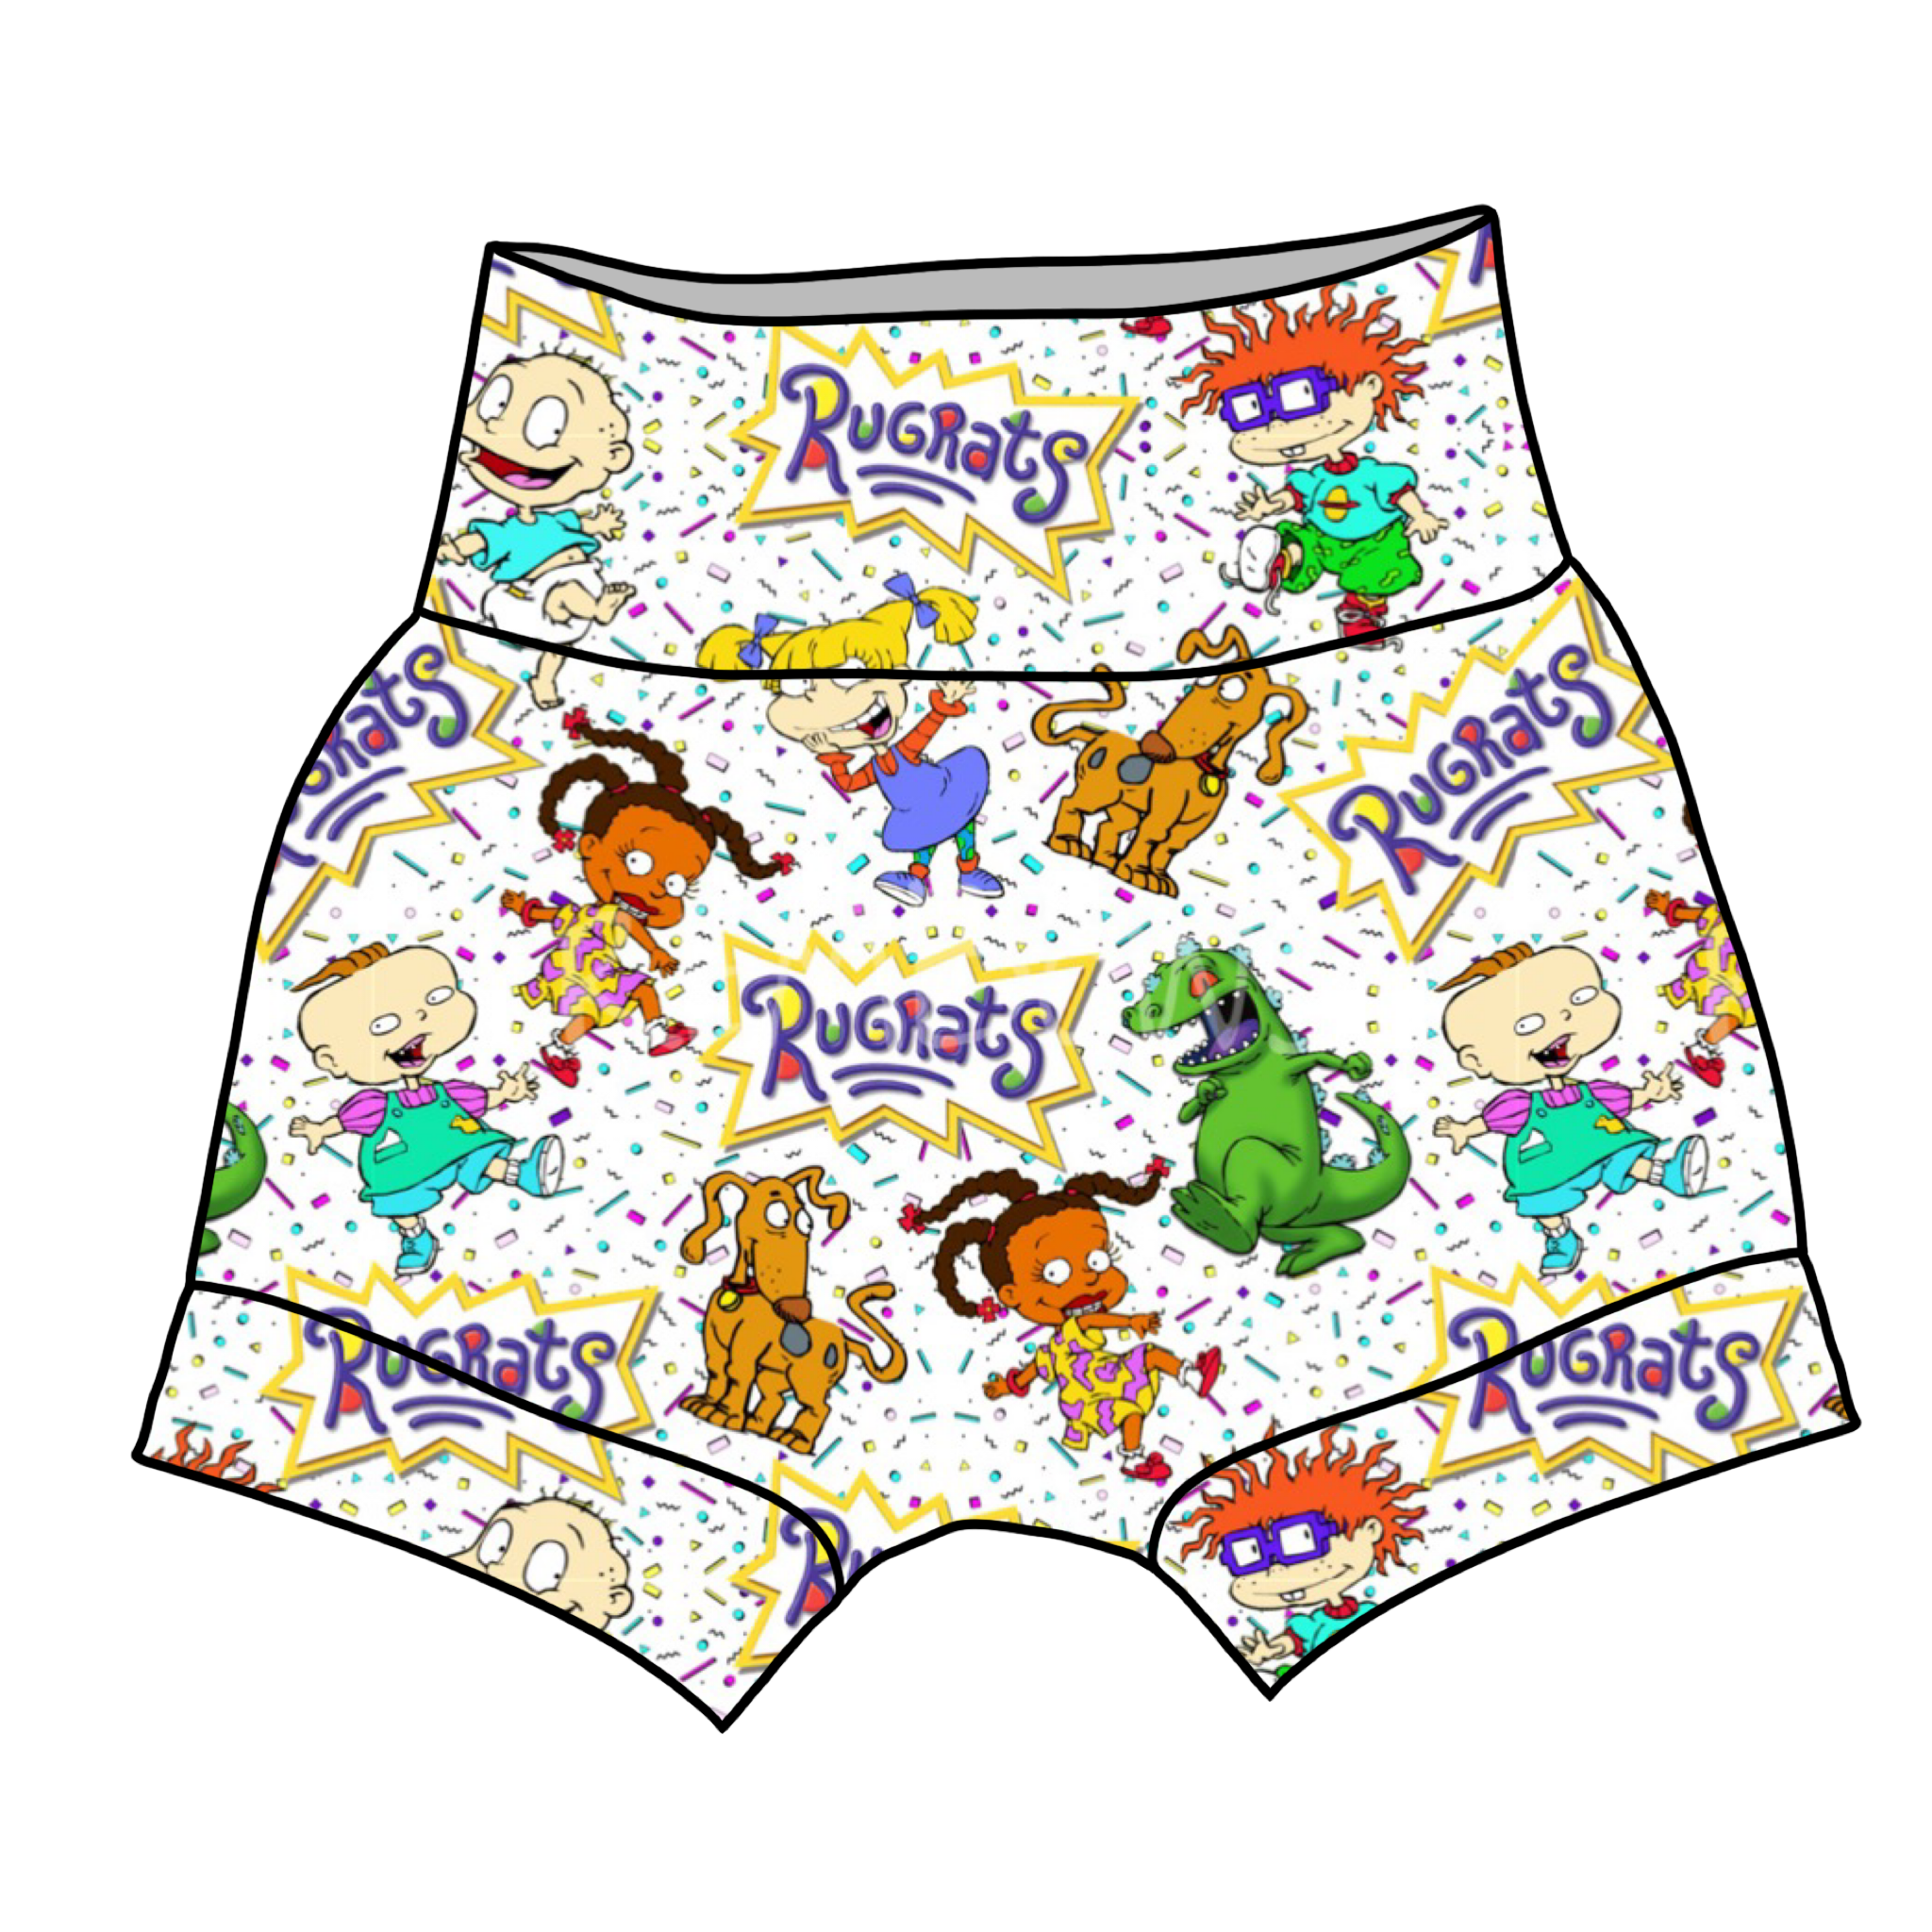 Rugrats Clothing Options (two prints)